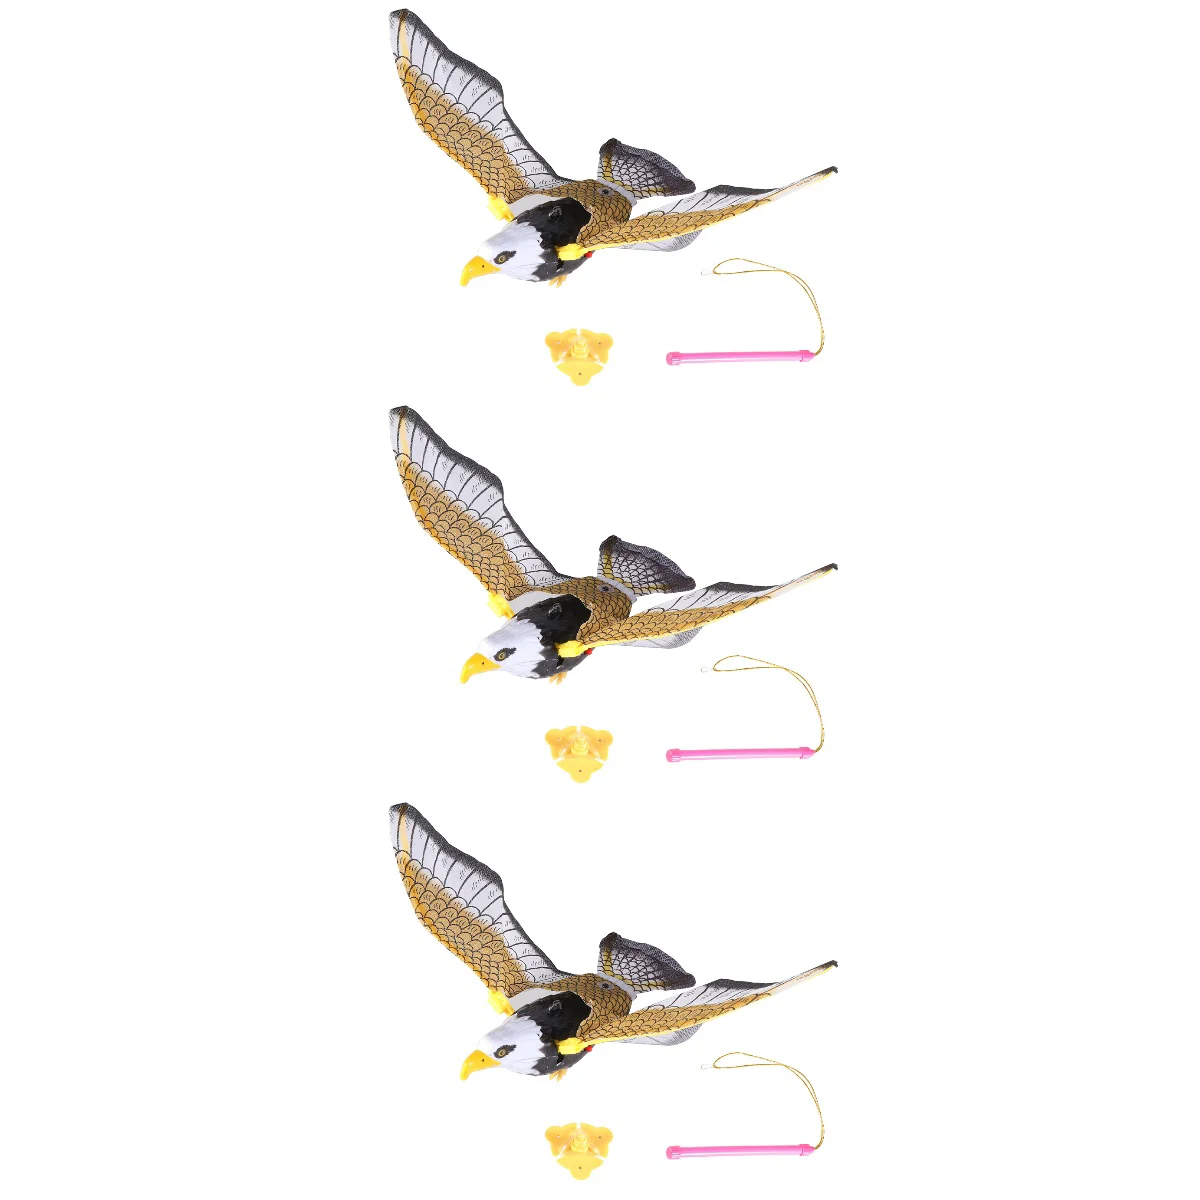 

3pcs Baby Electronic Flying Eagle Flying Sling Hovering Birds Flashing Gift with Stick Batteries